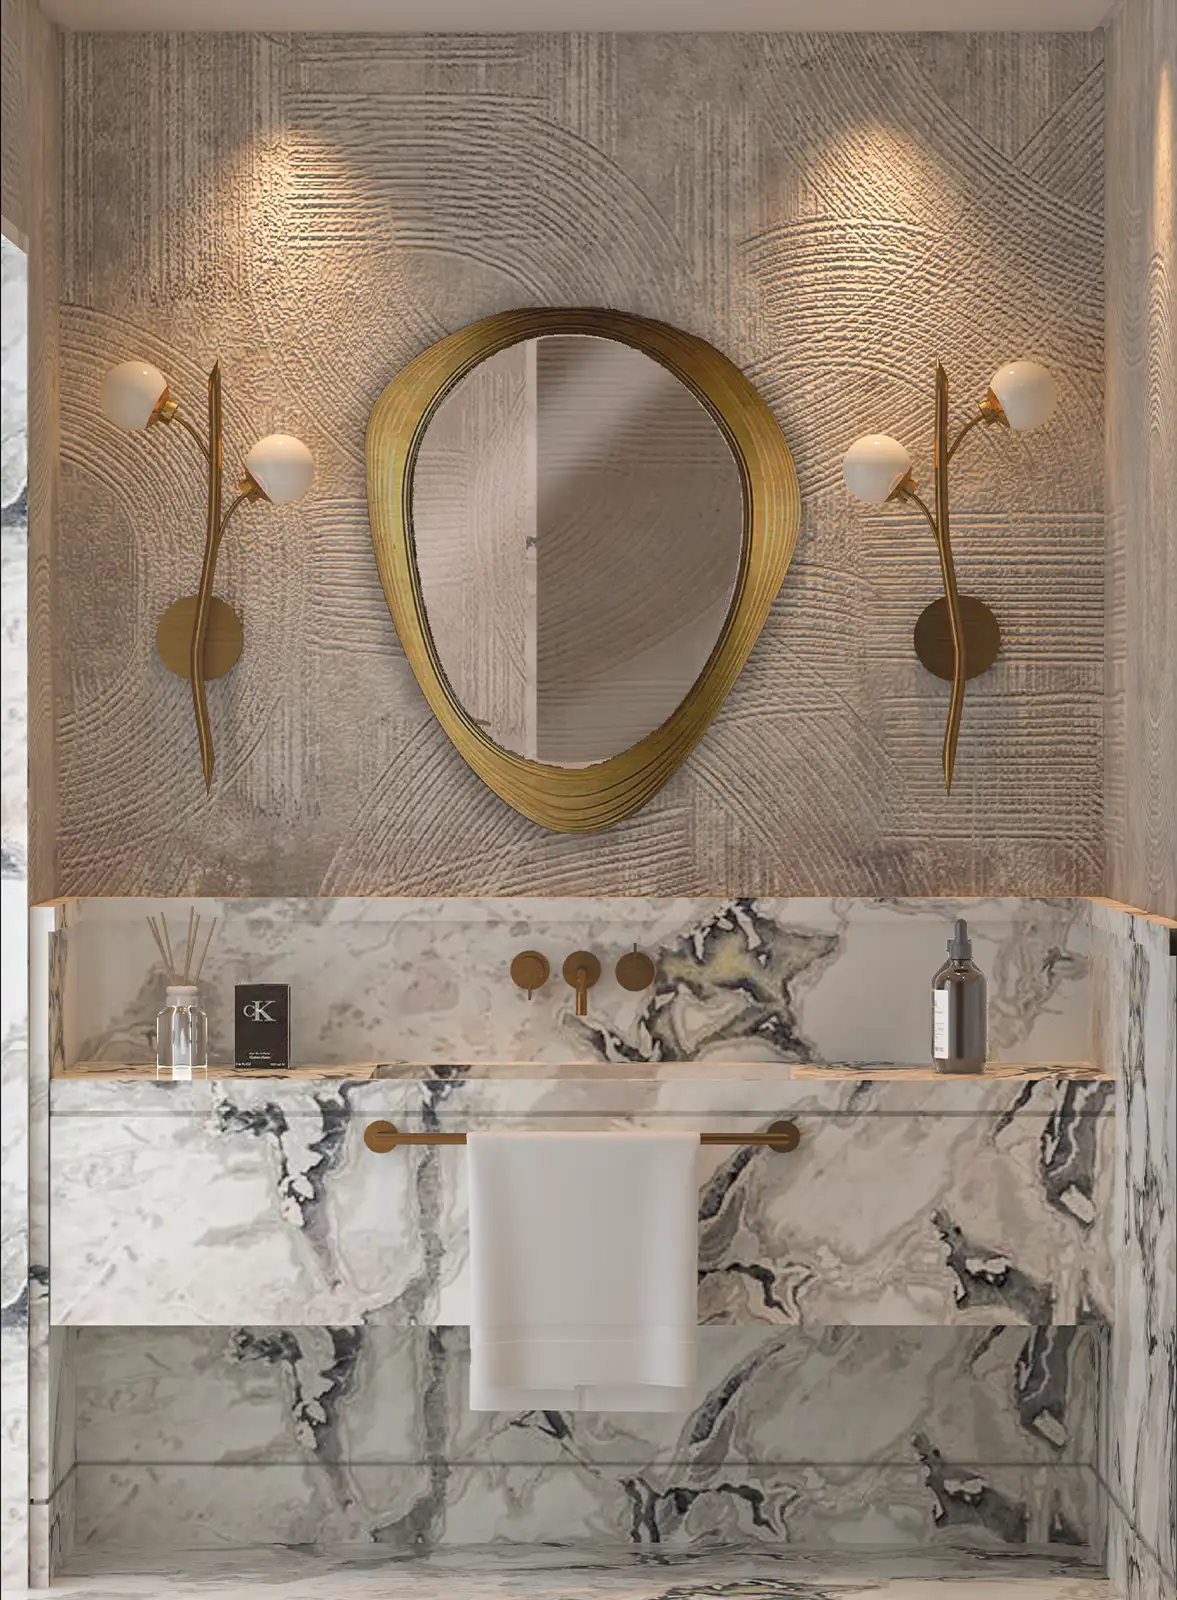 Sophisticated bathroom interior design with textured wall, a round gold-framed mirror, dual wall sconces, and a luxurious marble sink with brass fixtures, exuding elegance and contemporary style.